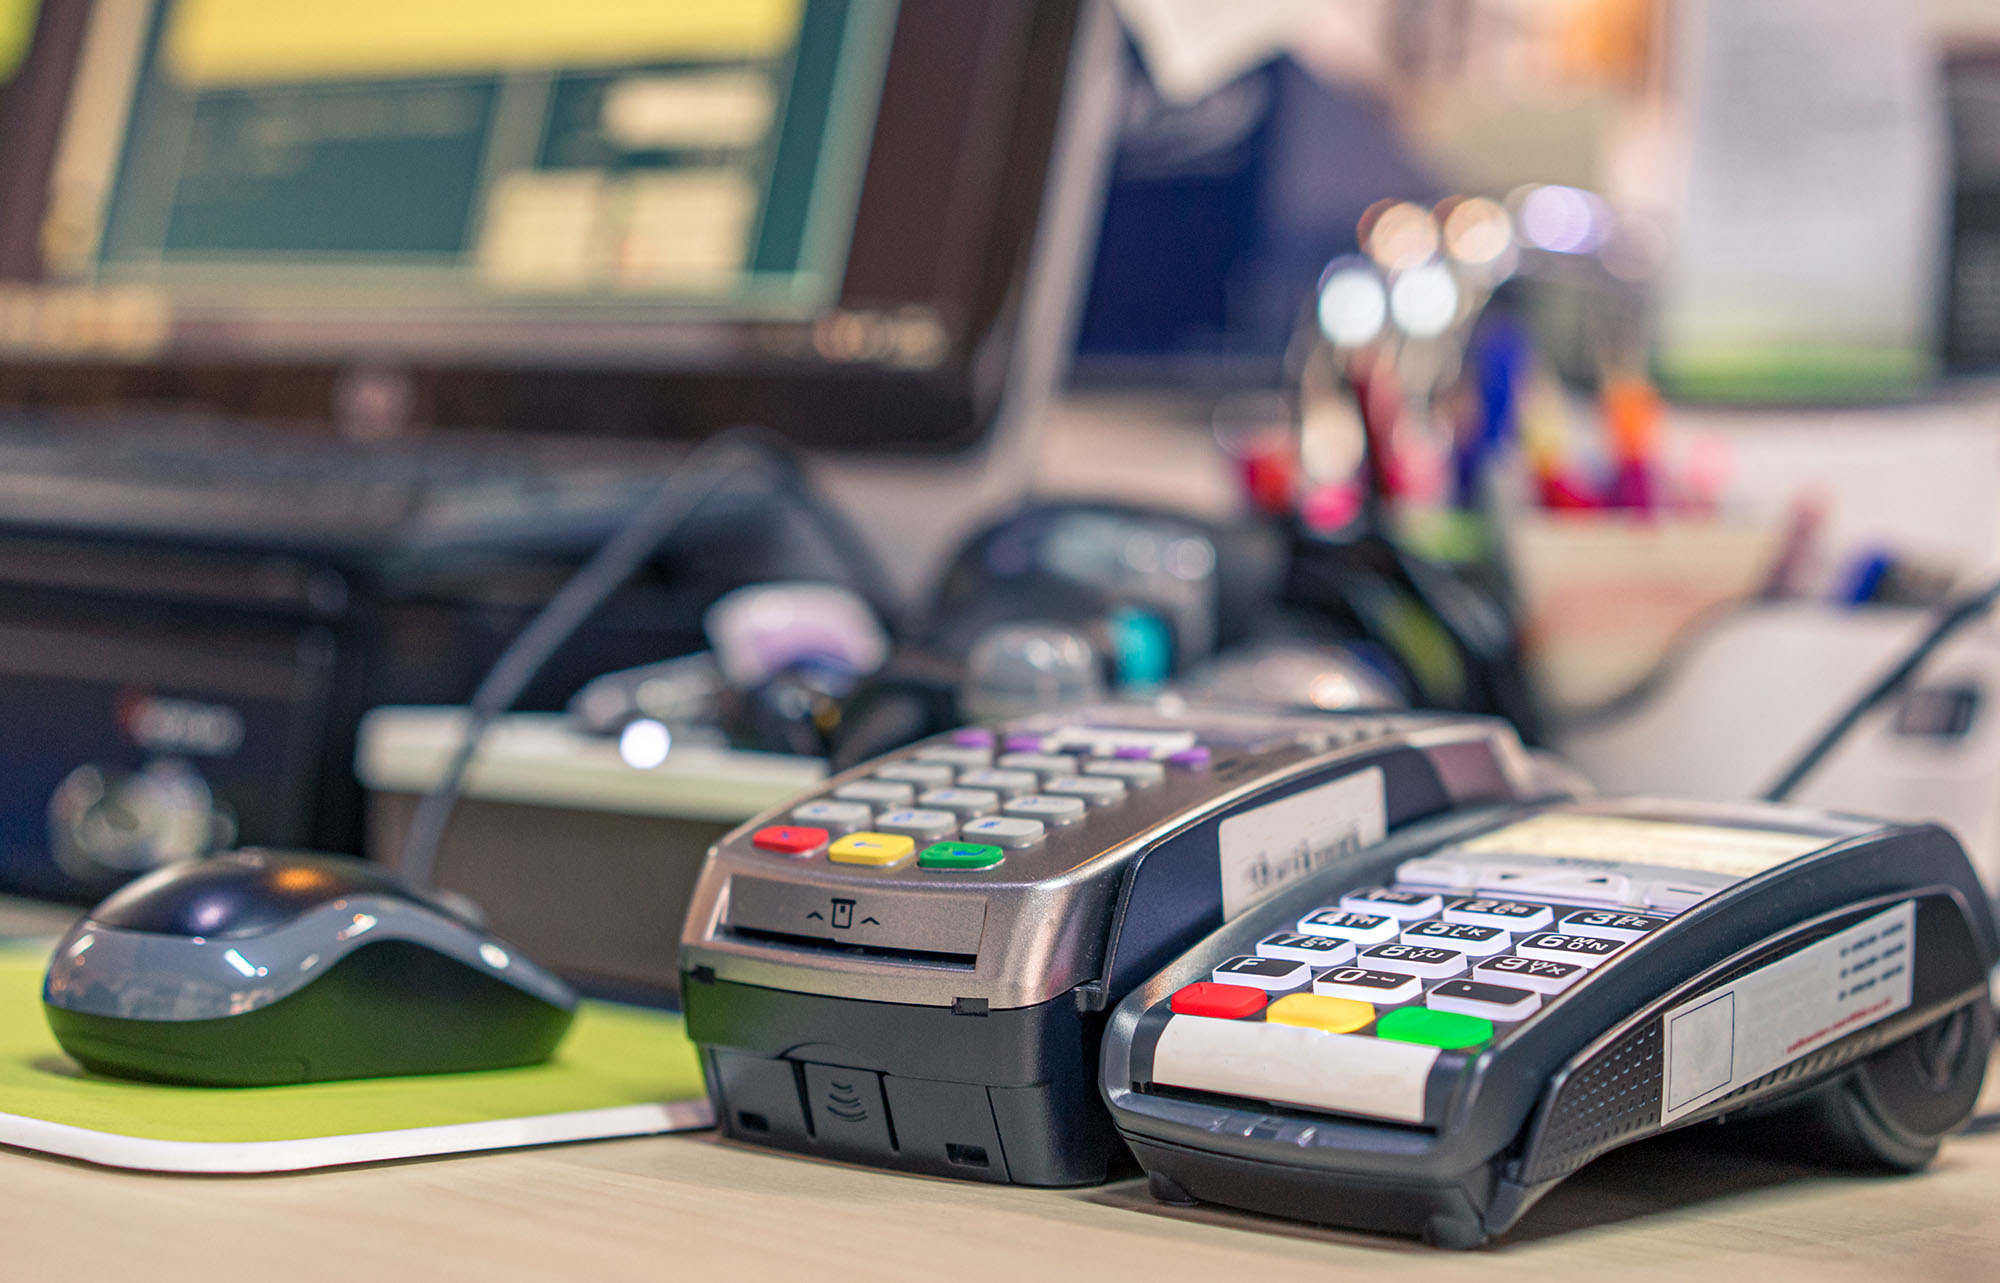 Essential components of POS system cost when calculating POS pricing